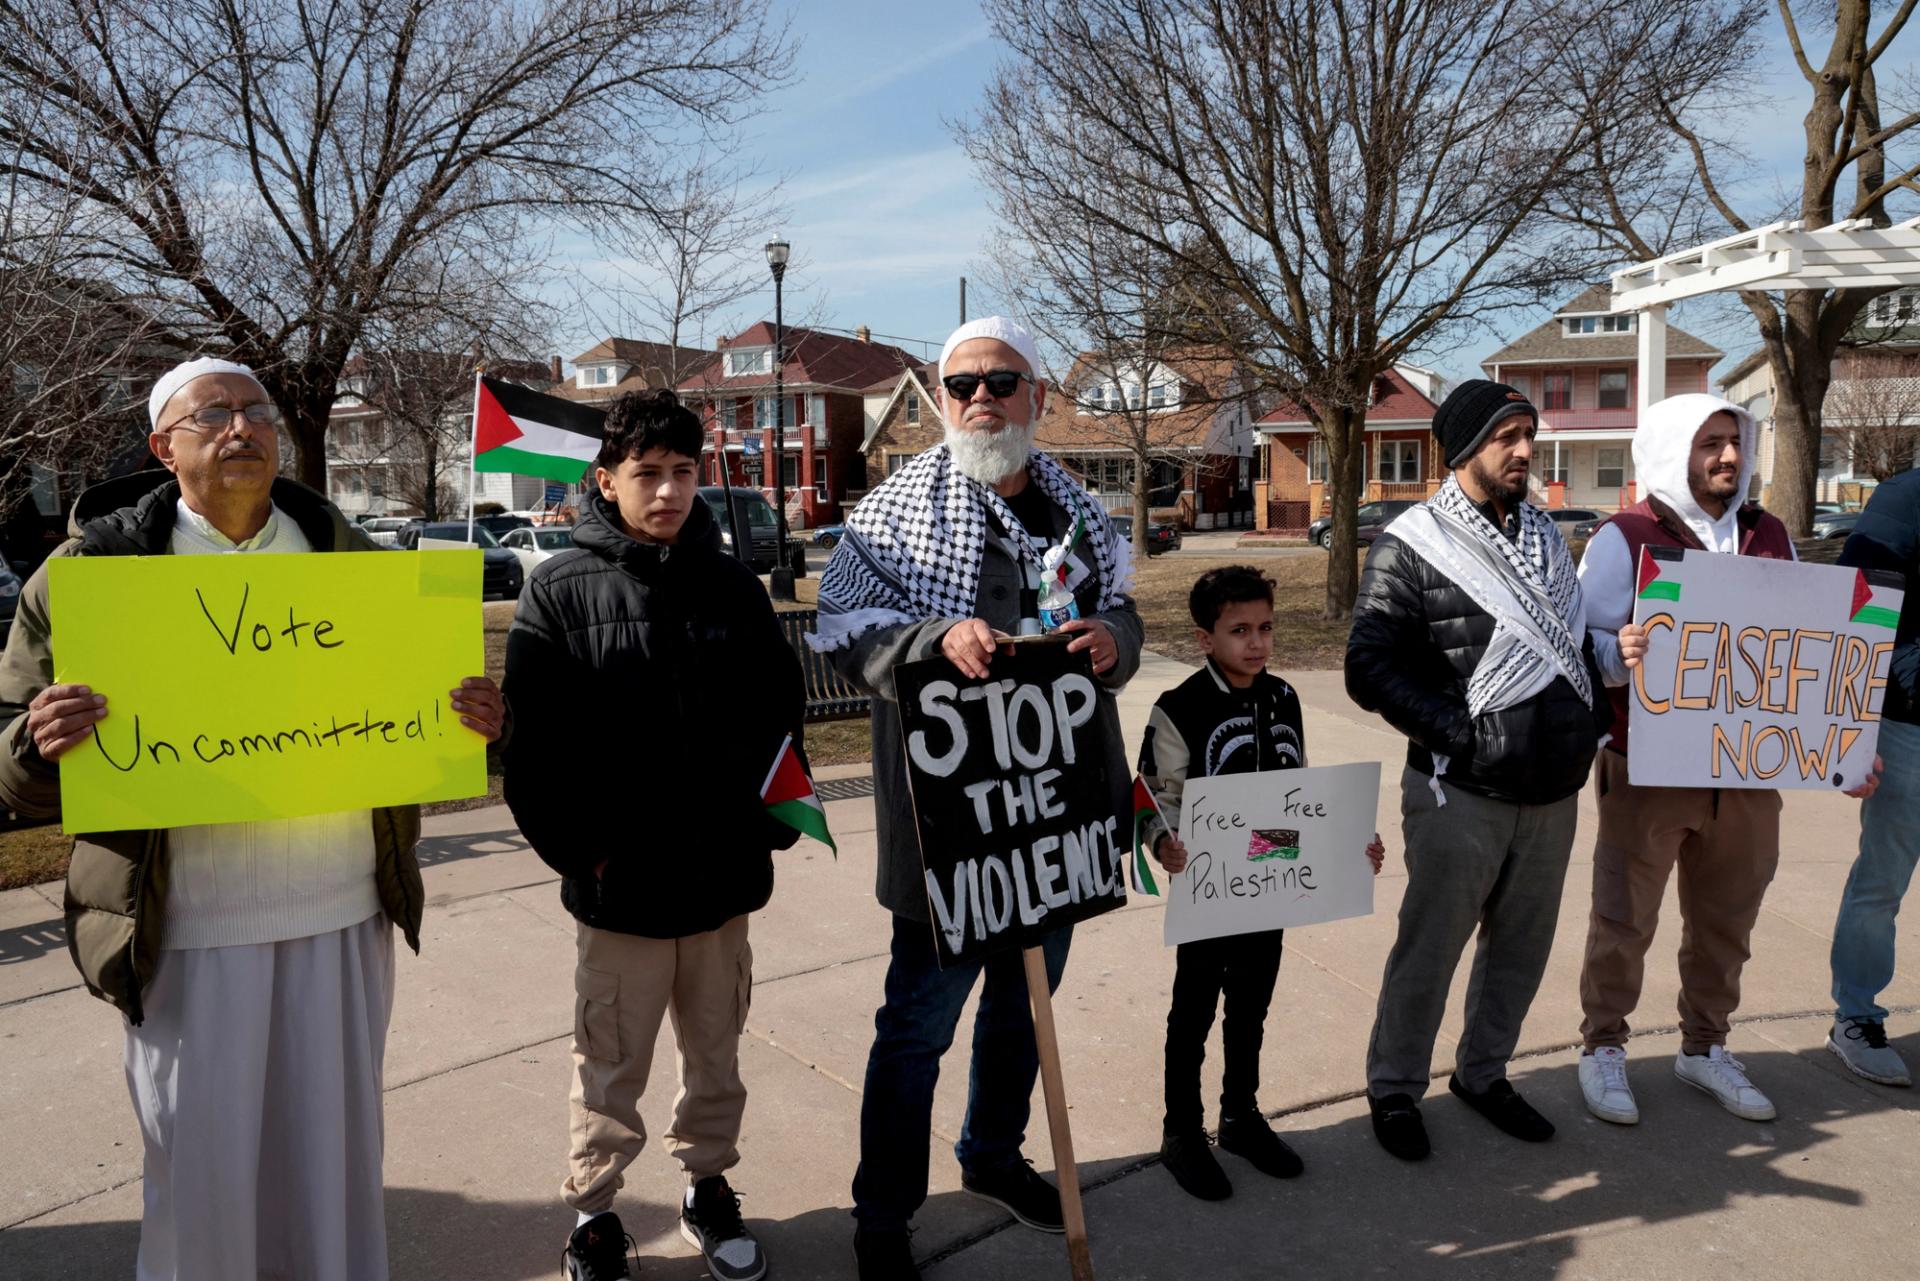 Supporters of the campaign to vote "Uncommitted" hold a rally in support of Palestinians in Gaza, ahead of Michigan's Democratic presidential primary election on Feb. 25, 2024.